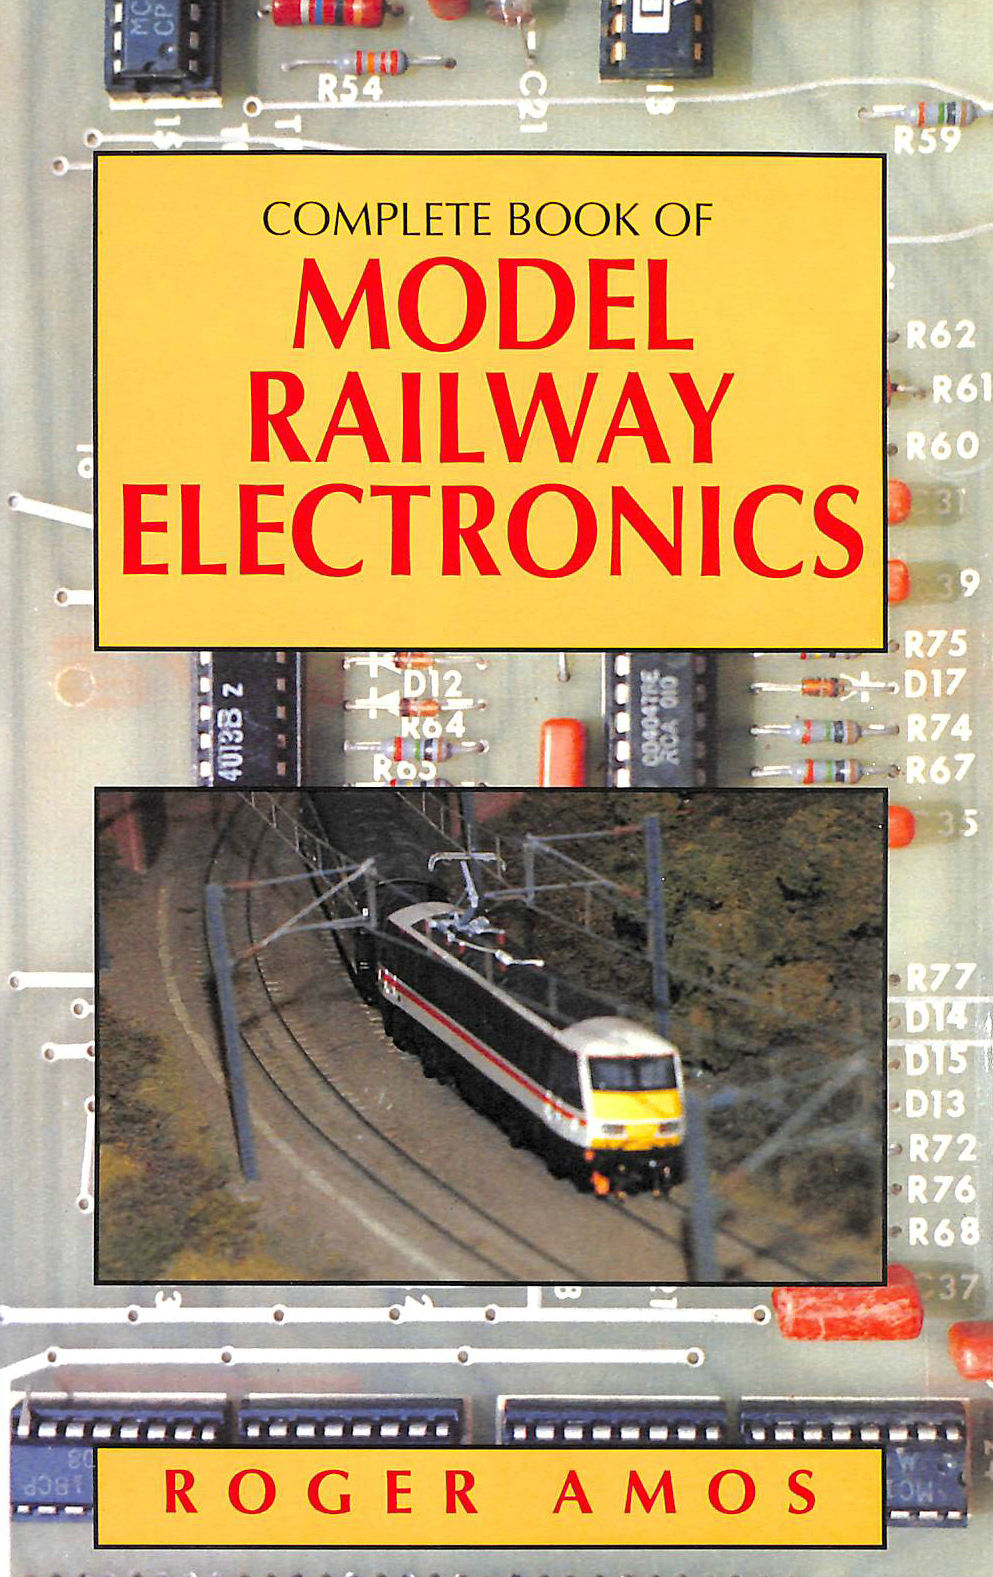 AMOS, ROGER - Complete Book of Model Railway Electronics